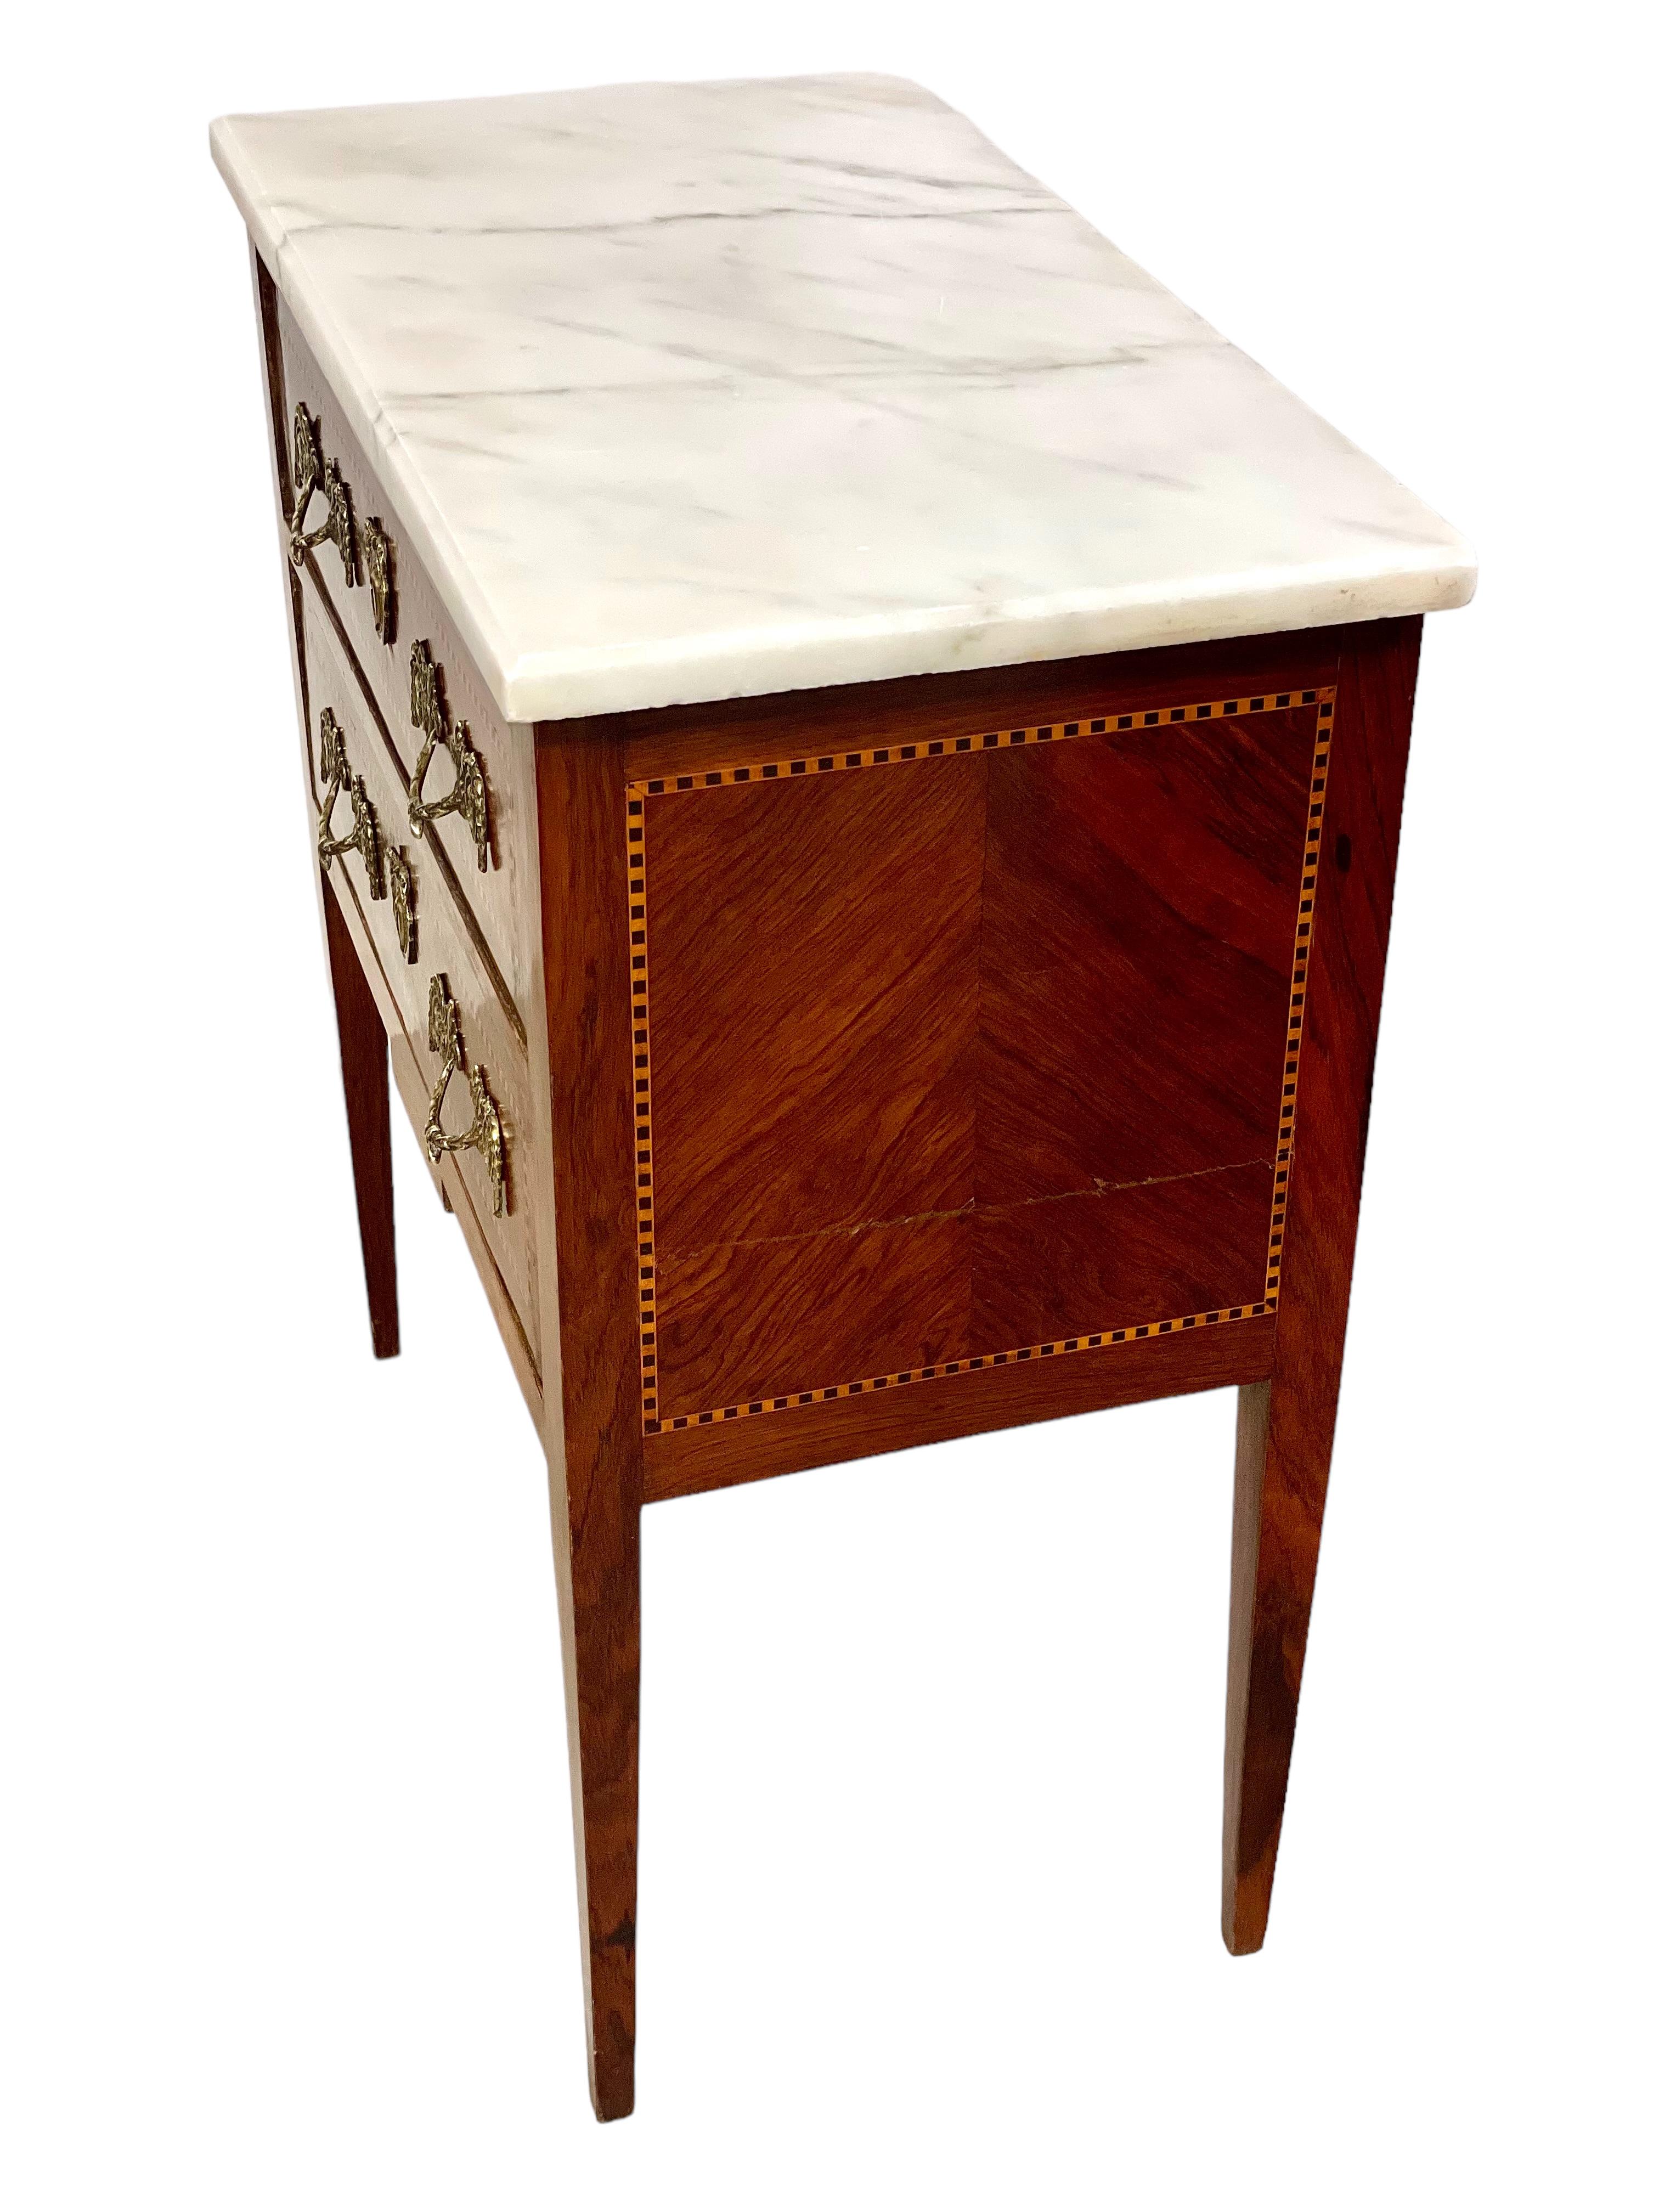 19th Century Louis XVI Marquetry Commode with Marble Top For Sale 1